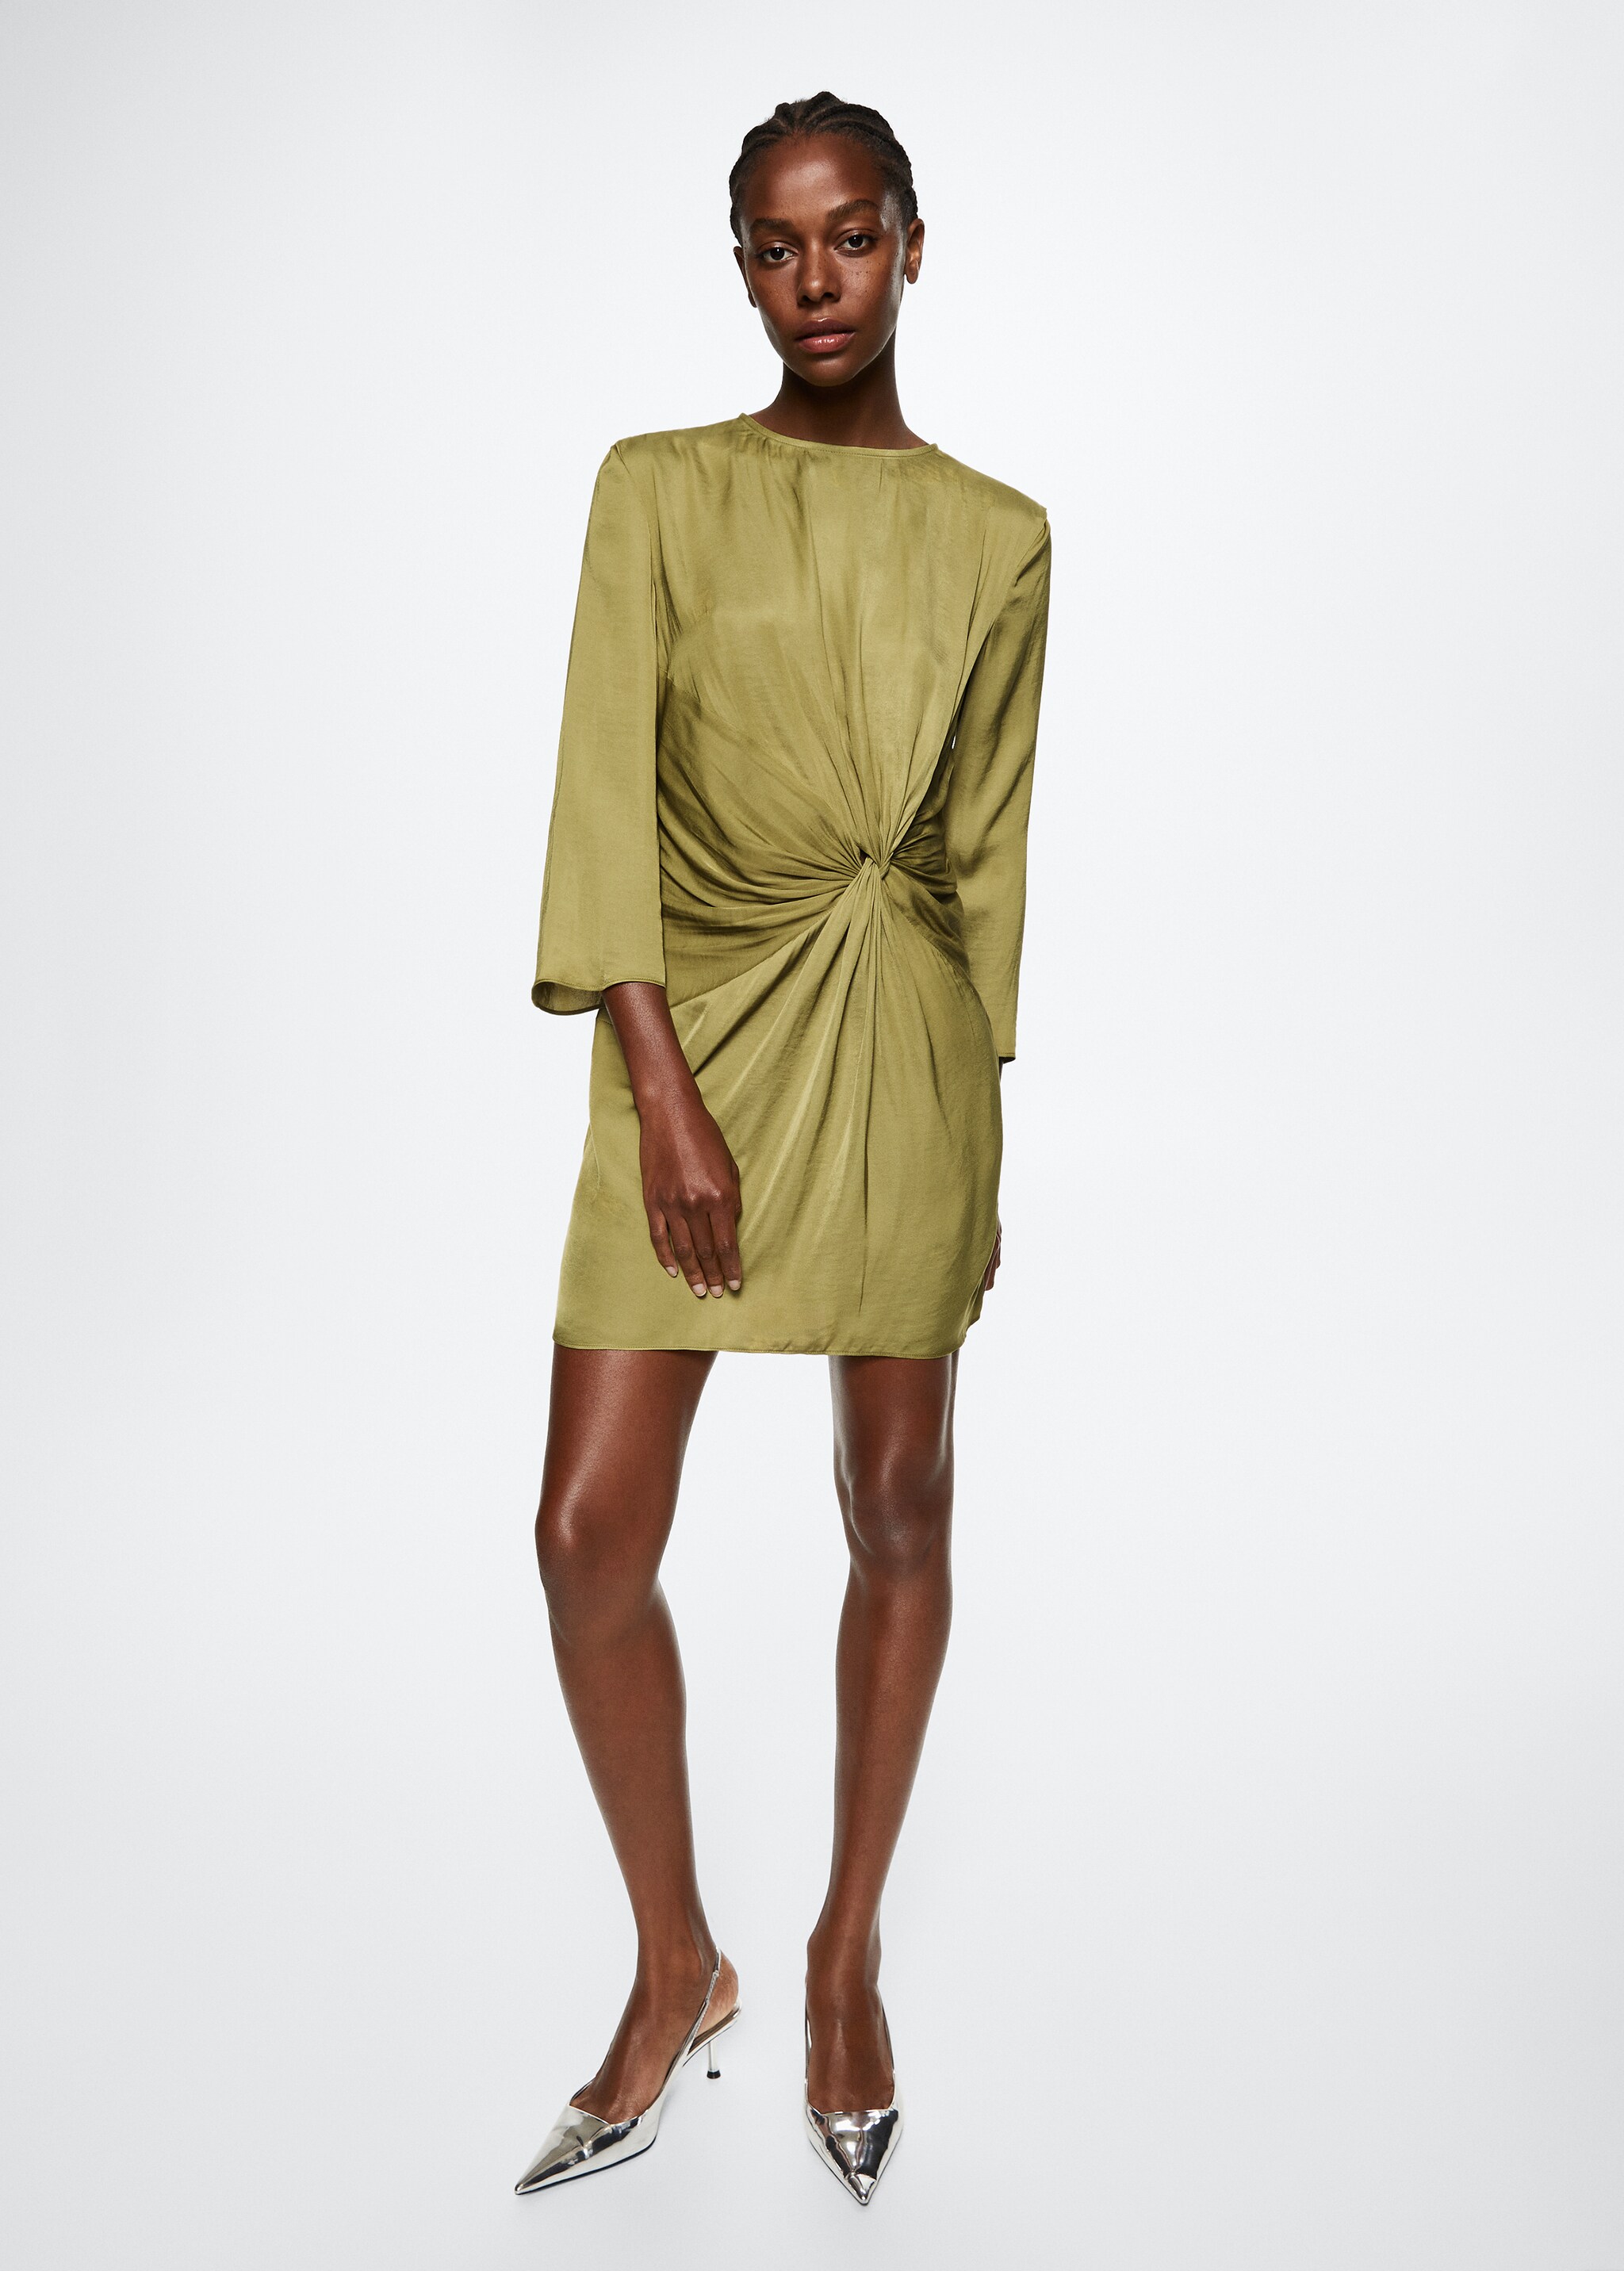 Satin dress with knot - General plane